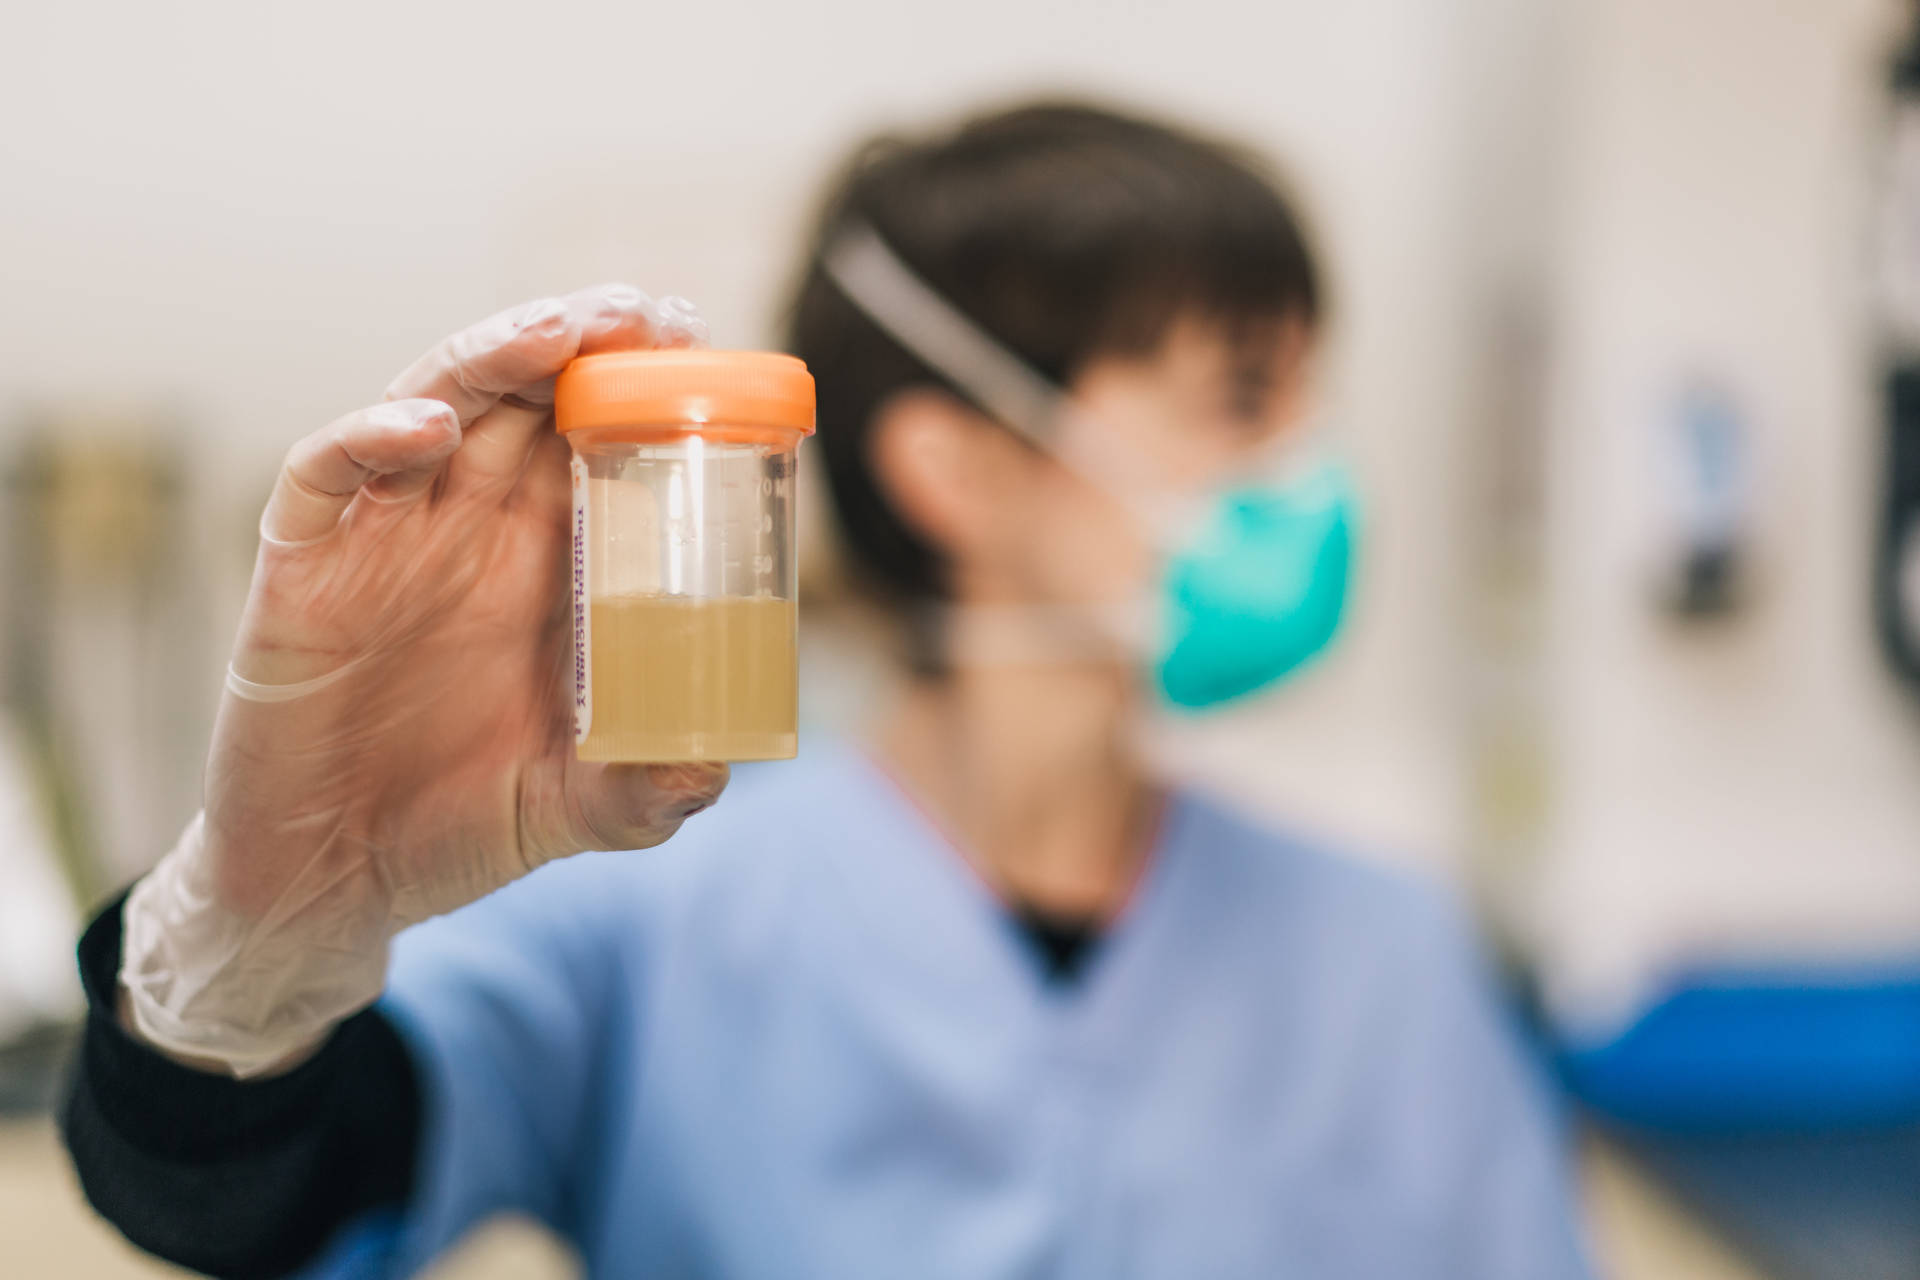 Urine Laboratory Test Sample In Cup